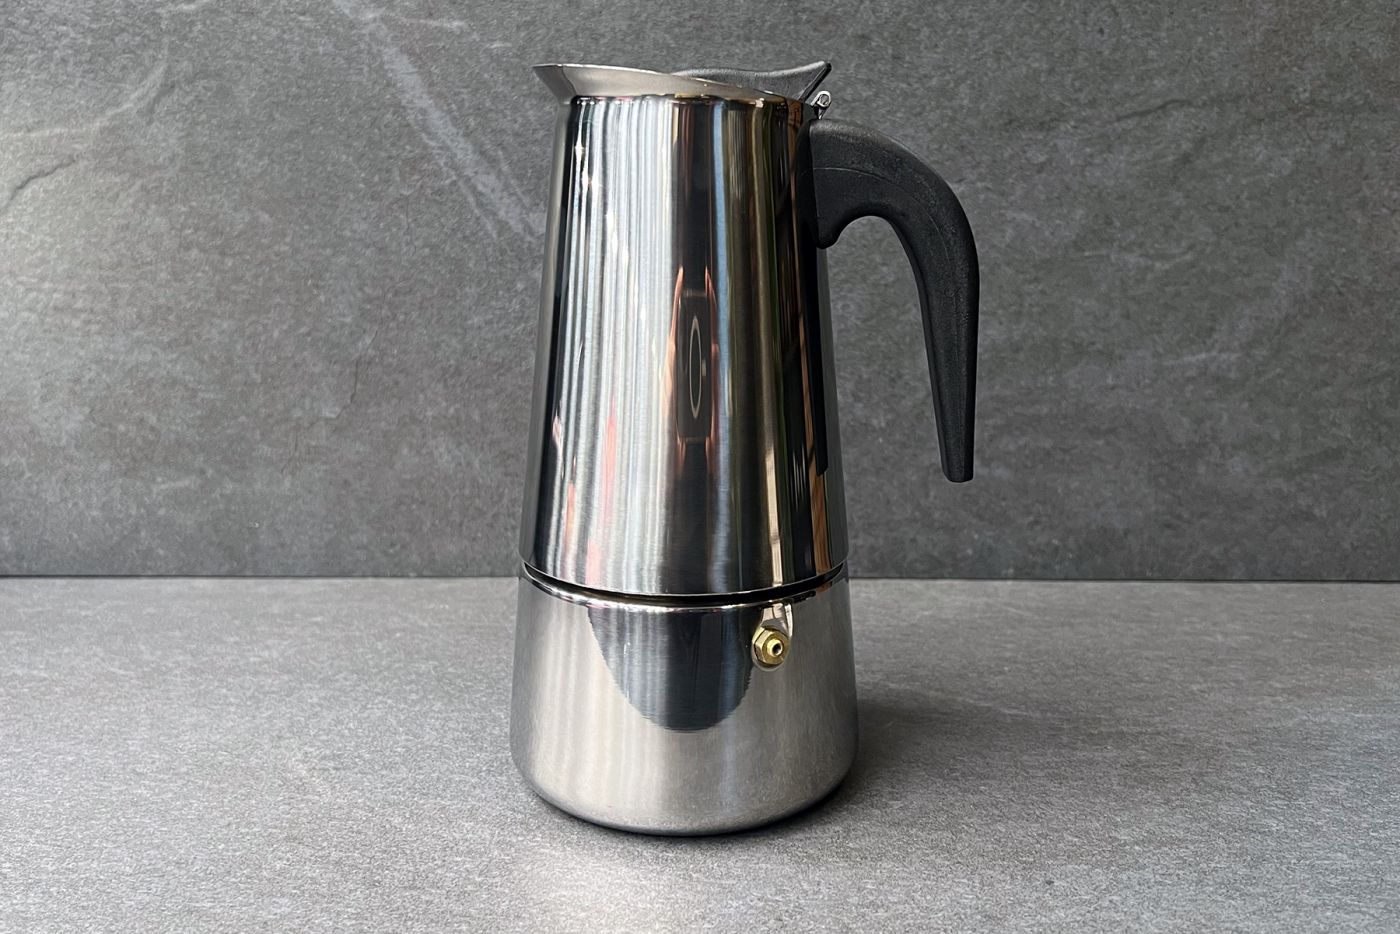 Moka Stainless Steel Espresso Maker 10-Cup